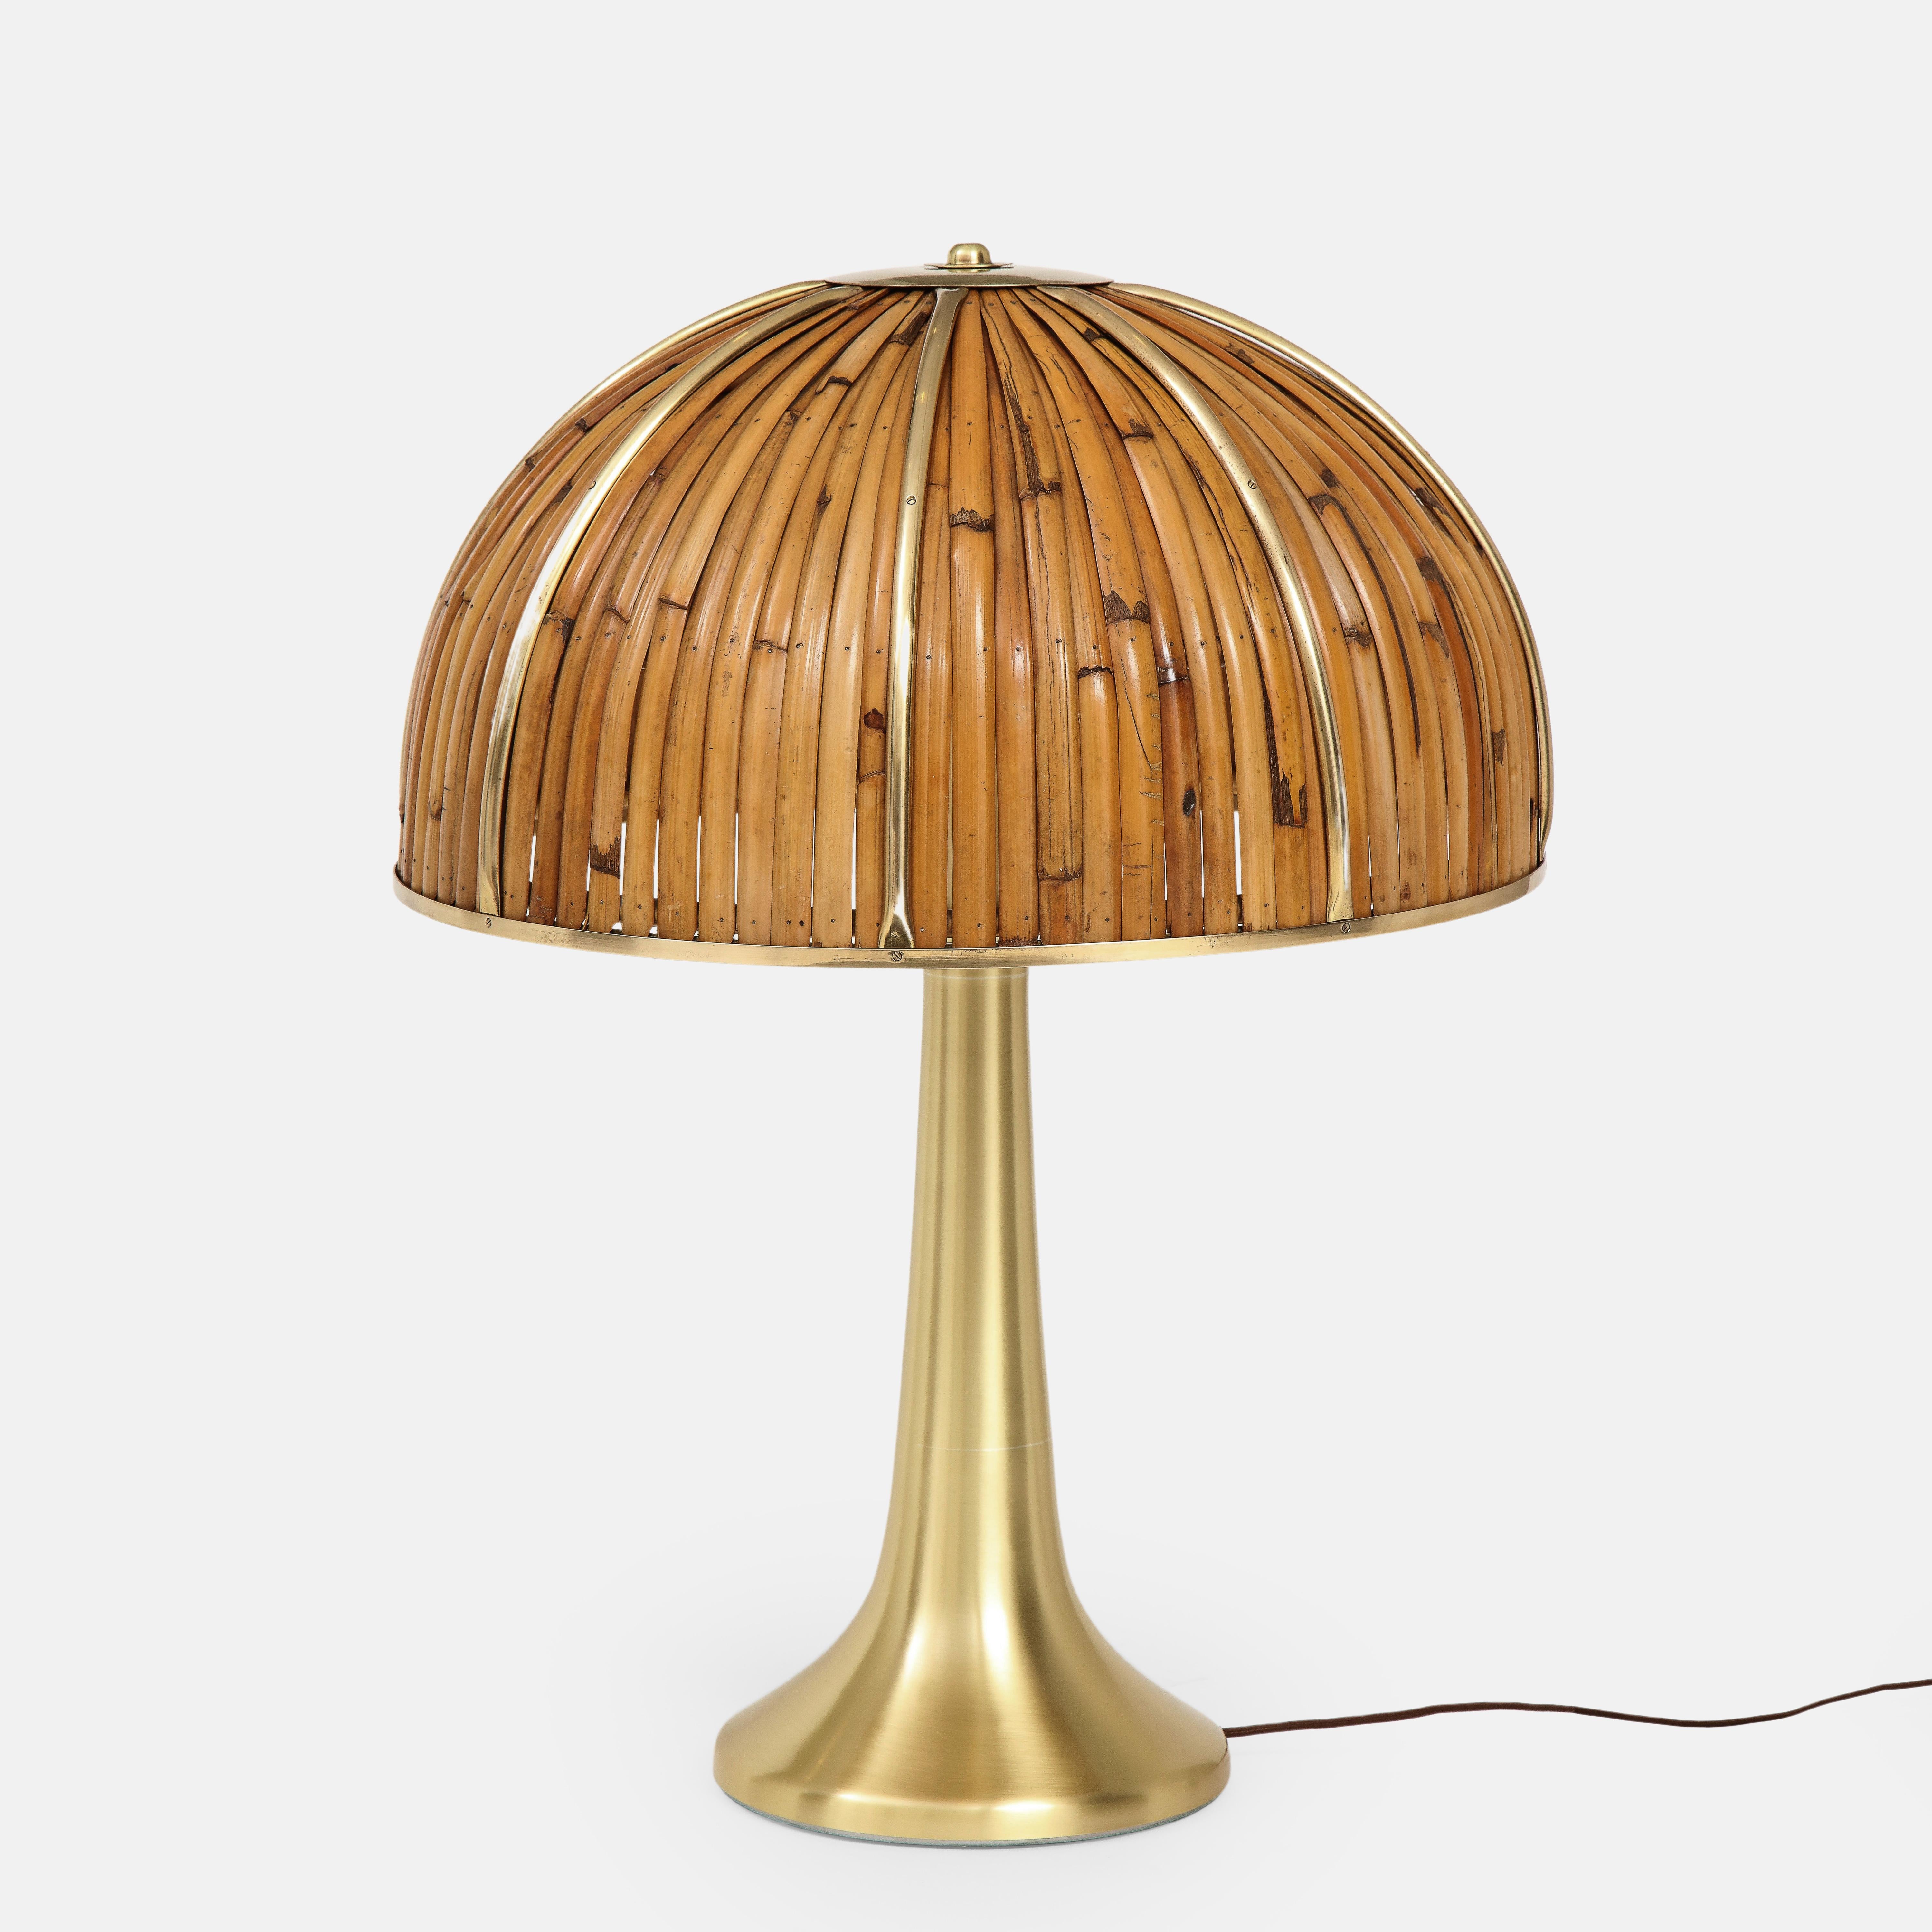 Gabriella Crespi rare large Fungo table lamp from the Rising Sun Series with lacquered bamboo strips and polished brass details on dome shade atop elegant flared brass base, Italy, 1970s.  Impressed with facsimile signature and artist’s cipher to